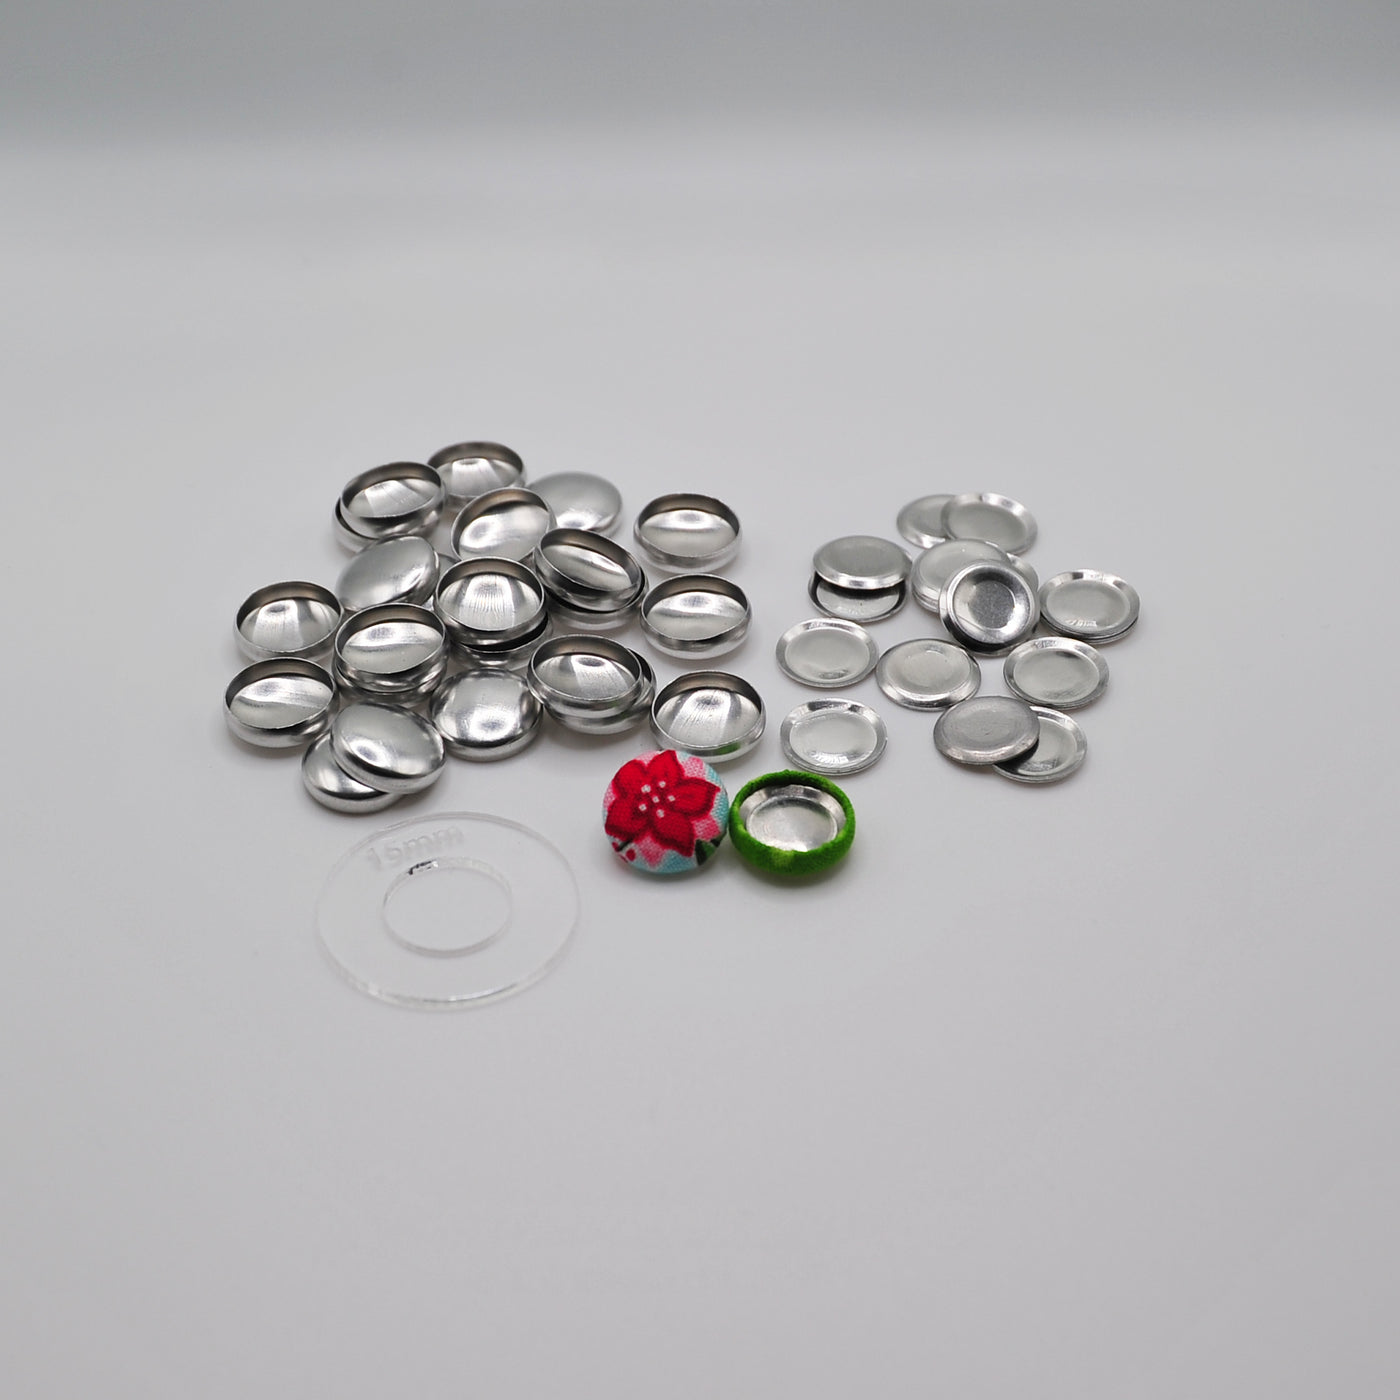 15mm (5/8 Inch) (Size 24 US) Self Cover Buttons